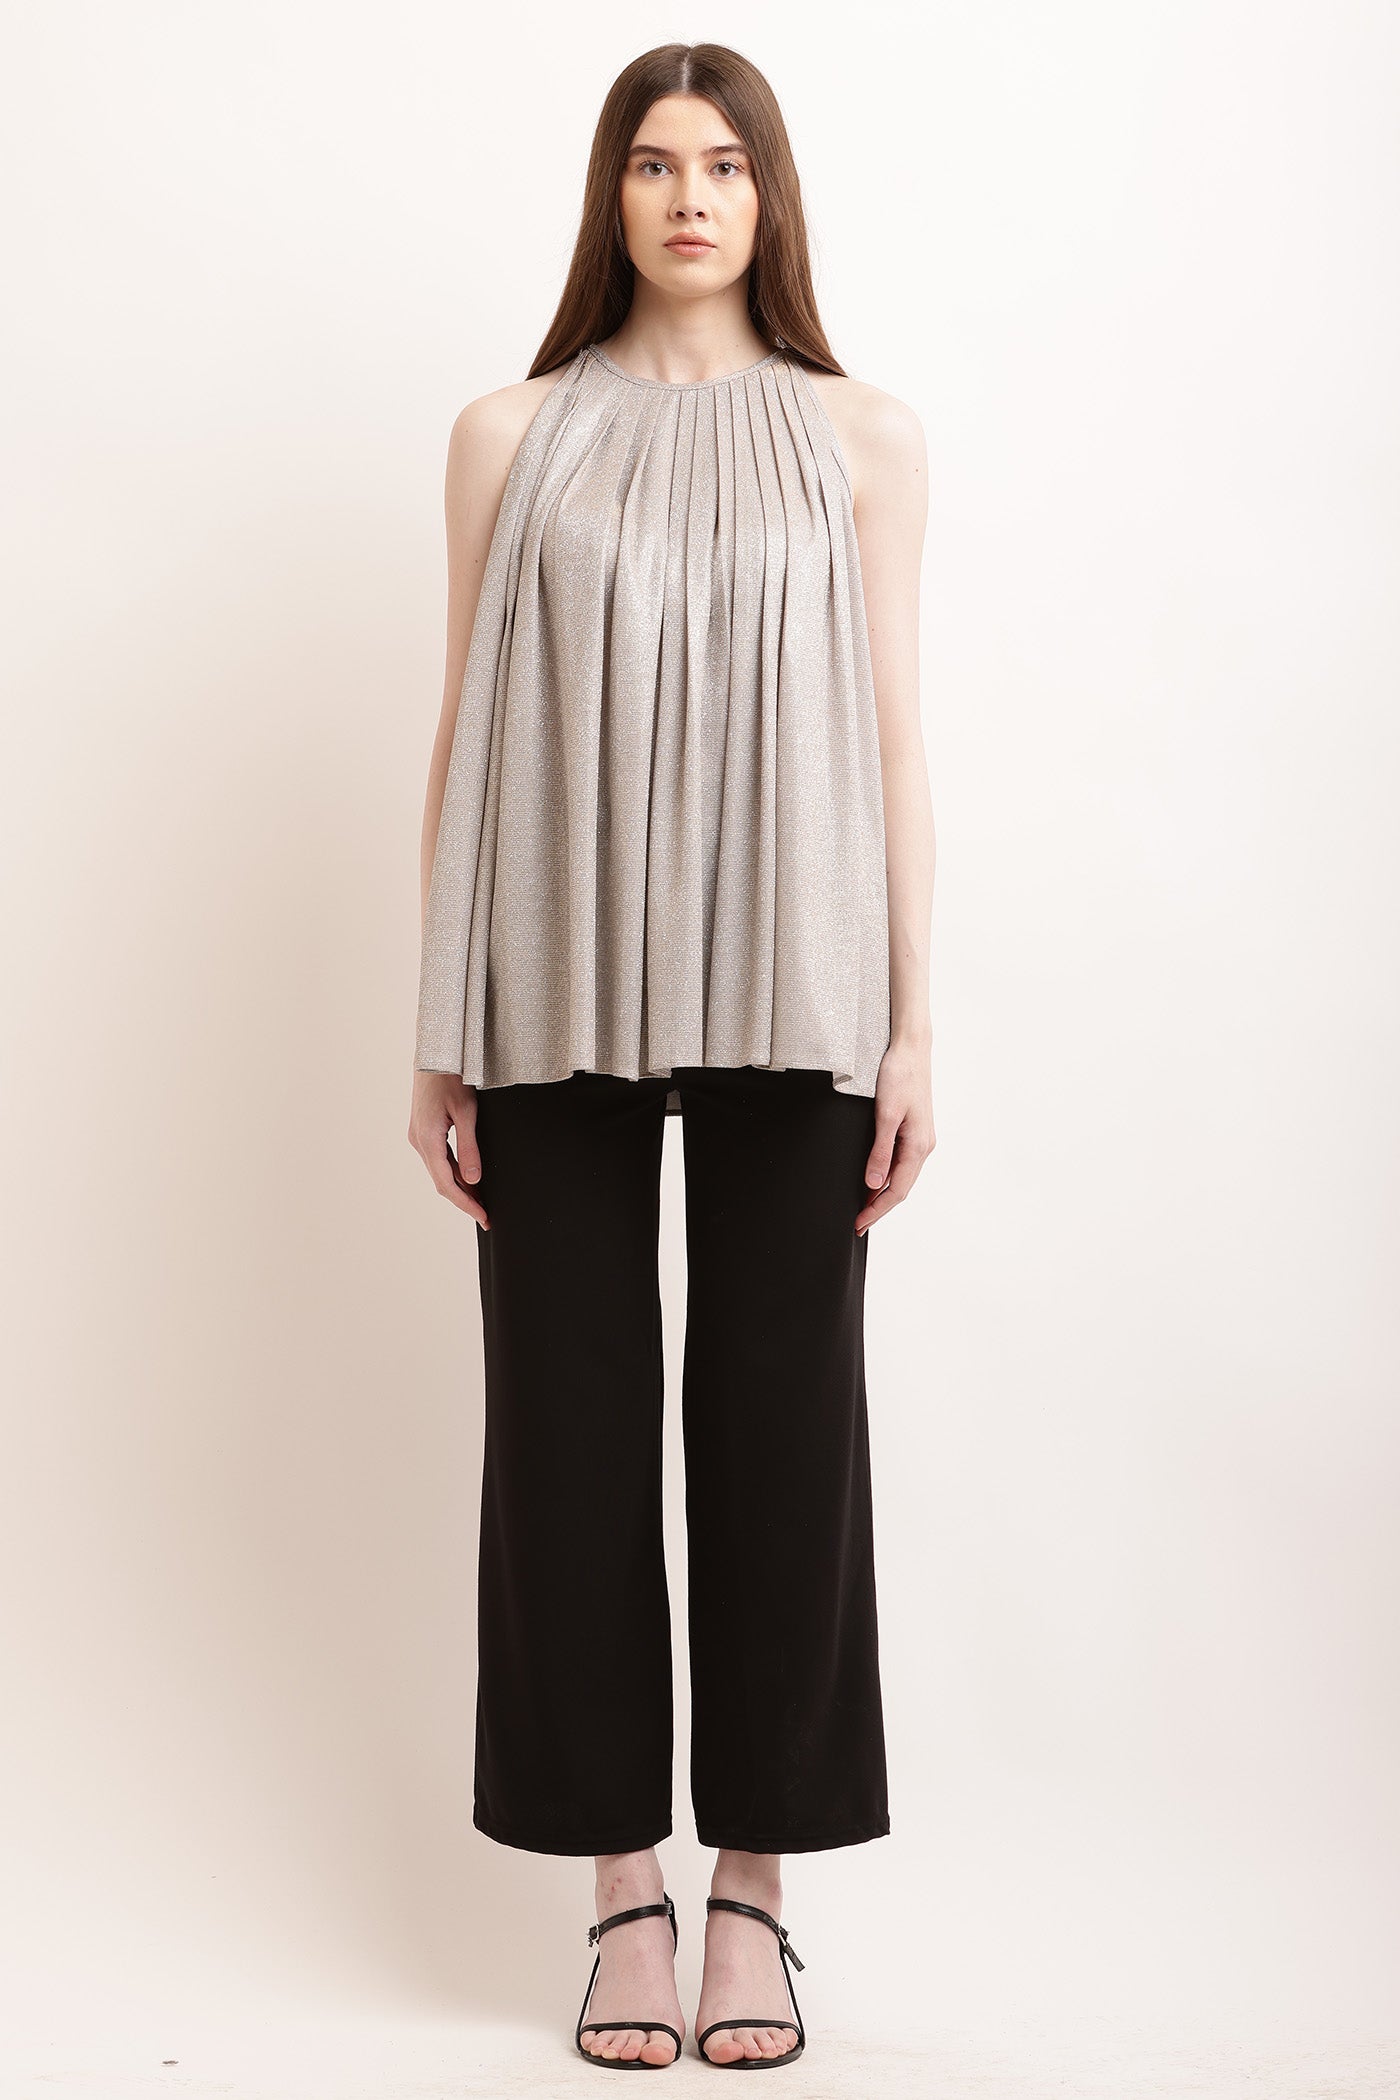 Silver Glitter Pleated Top